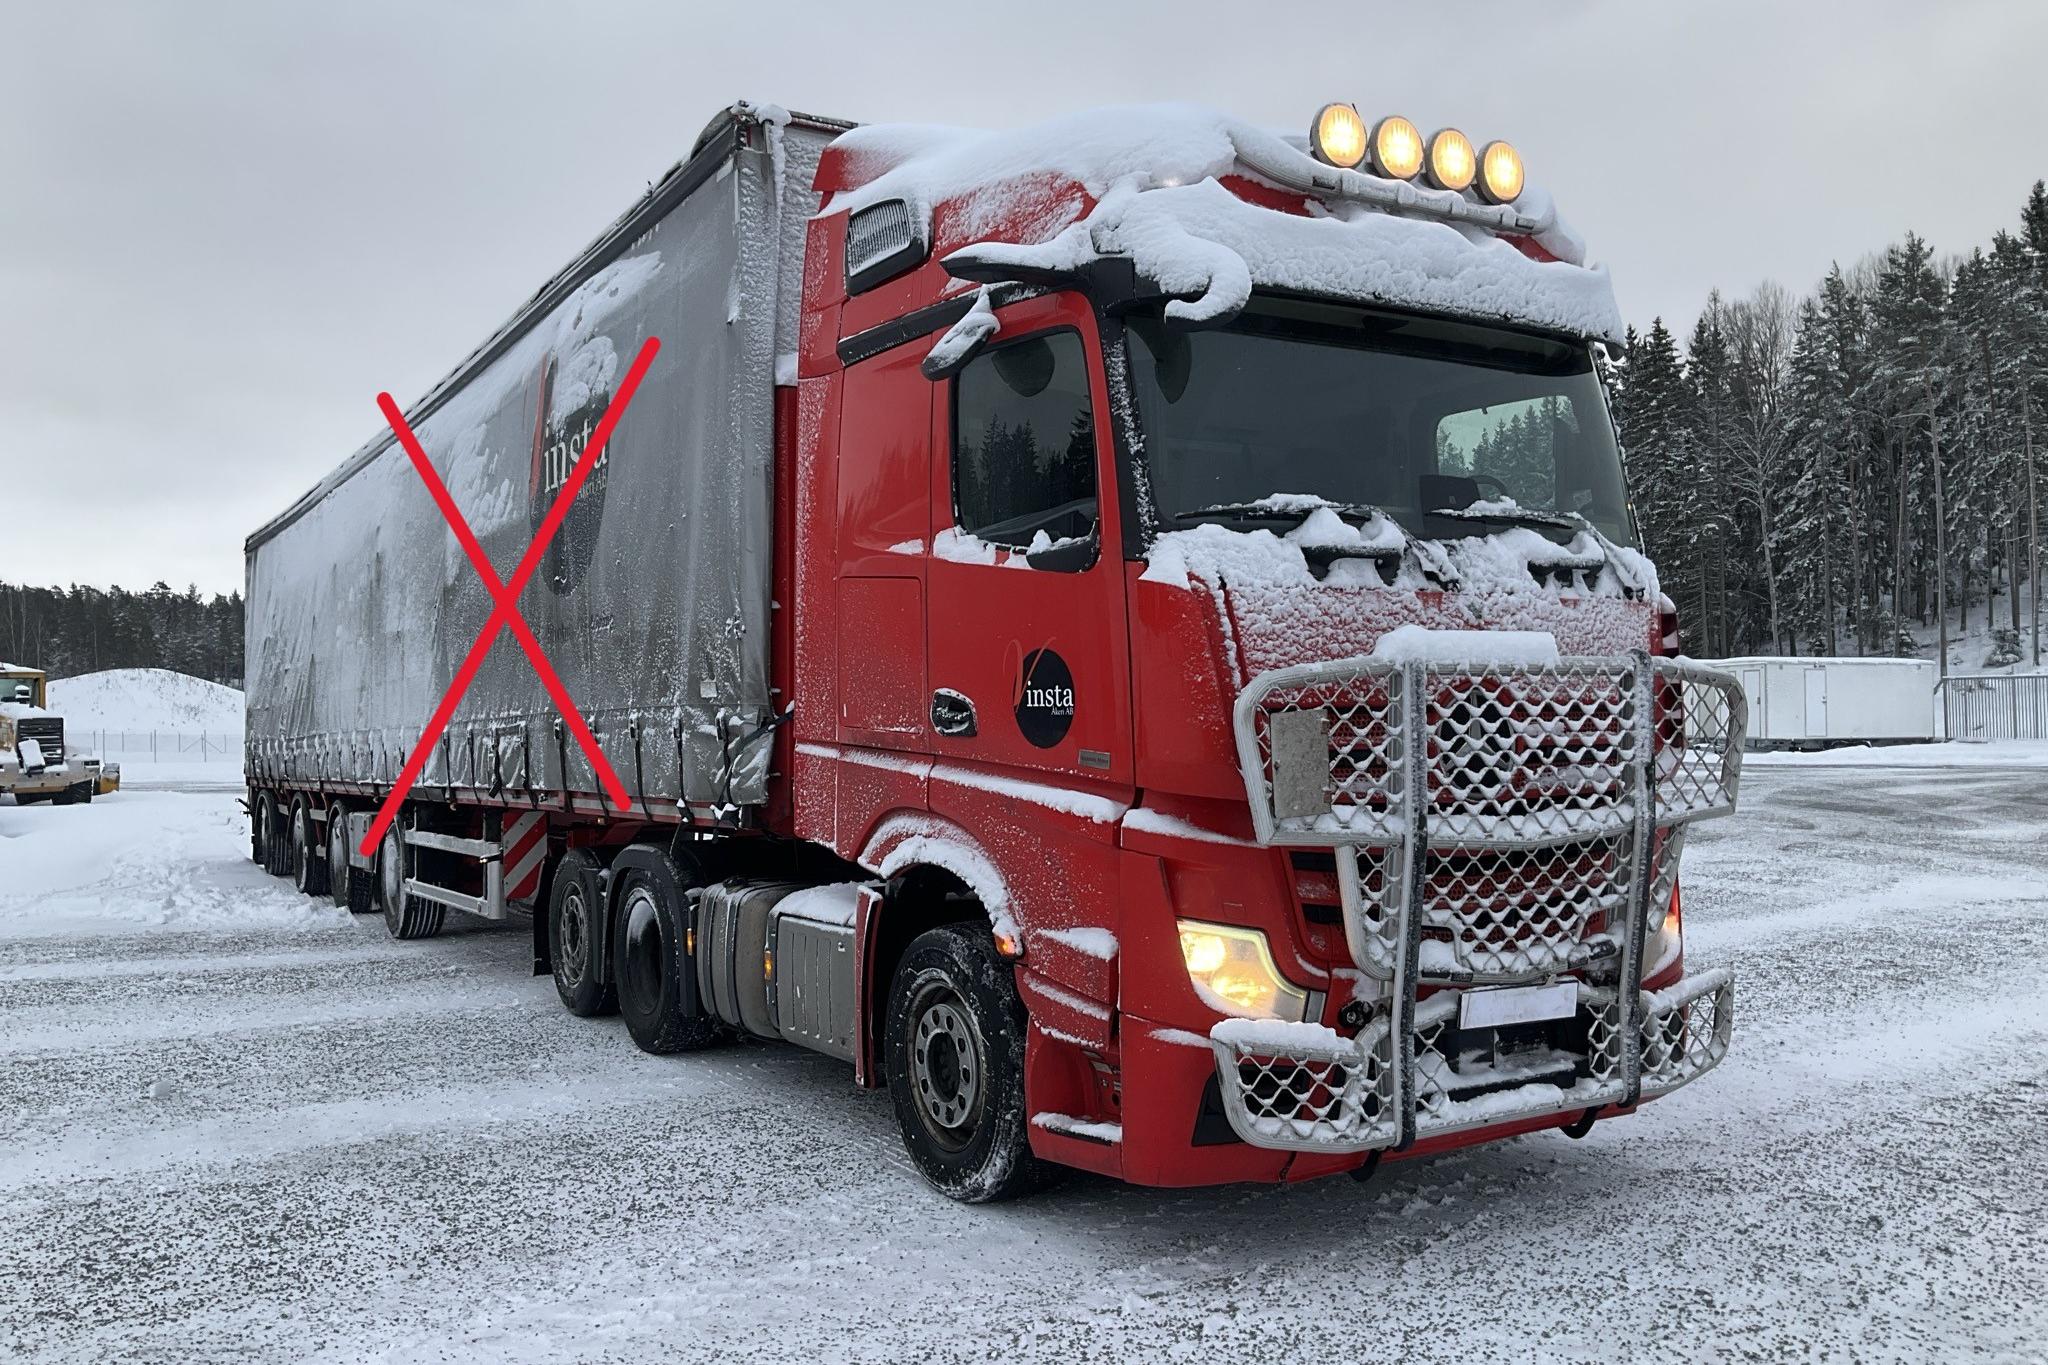 MERCEDES Actros - 524 991 km - Automatic - red - 2019